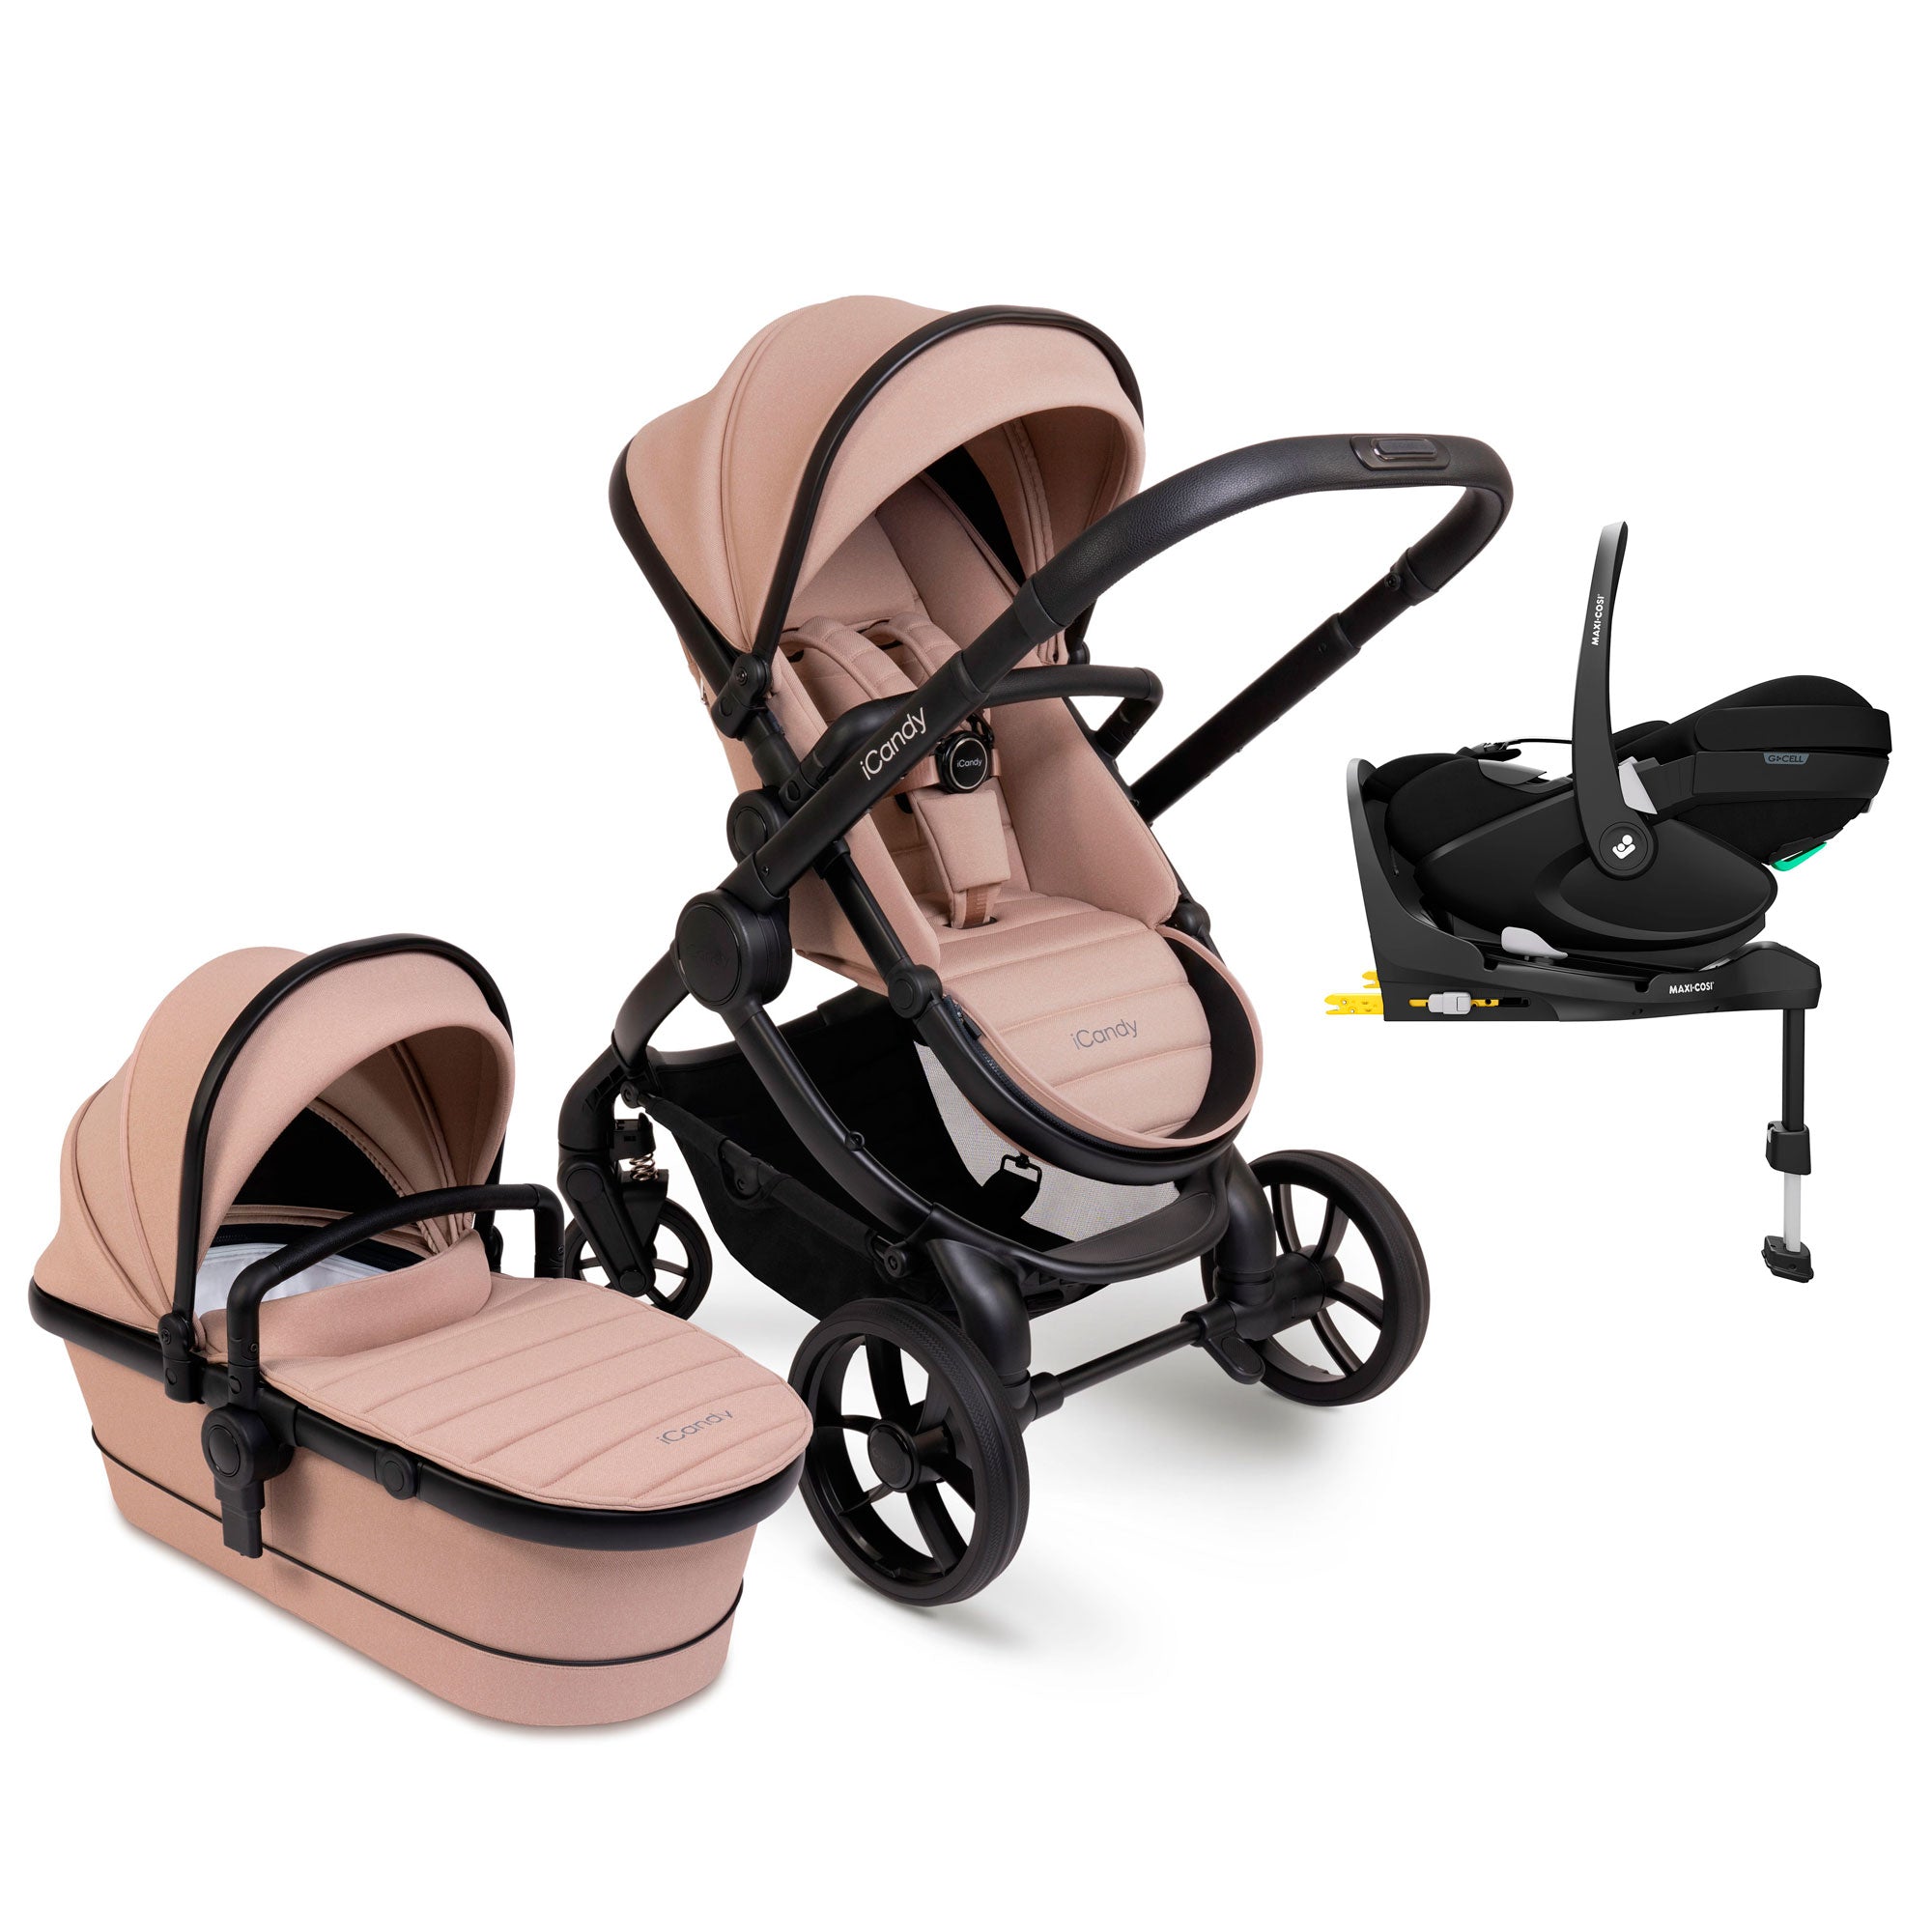 iCandy Peach 7 Maxi-Cosi Combo Set in Cookie